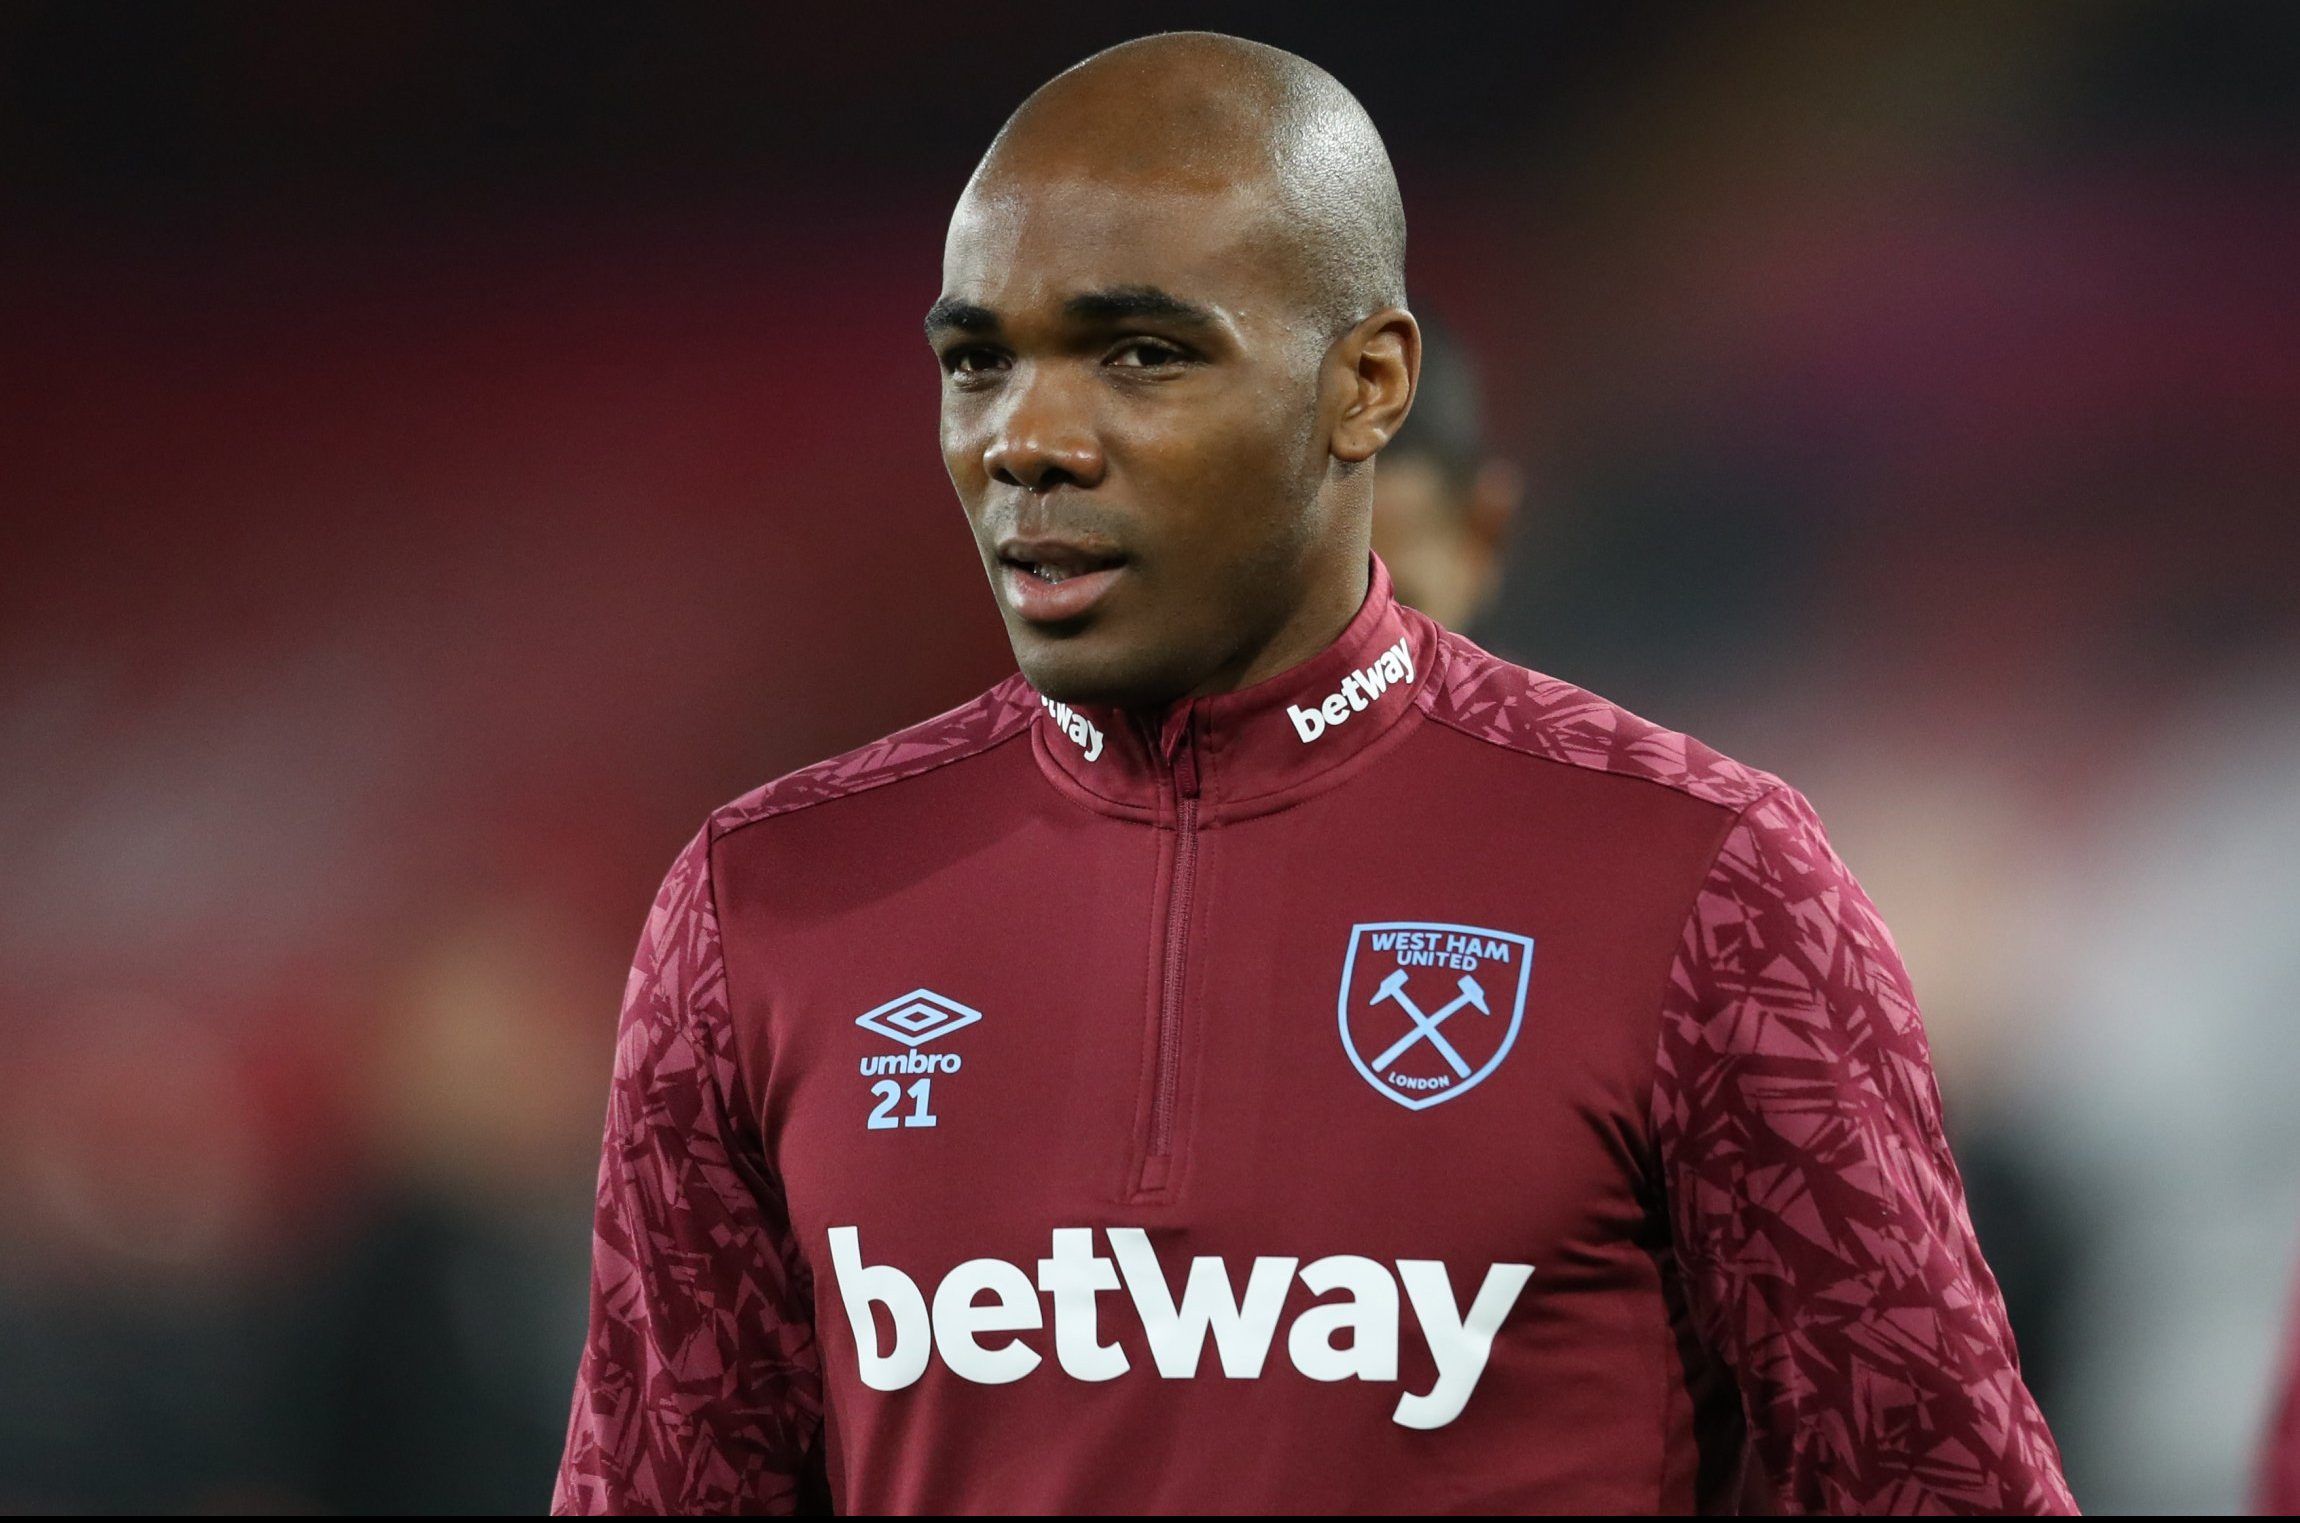 west ham defender angelo ogbonna looks on pre-game vs southampton injury latest update news